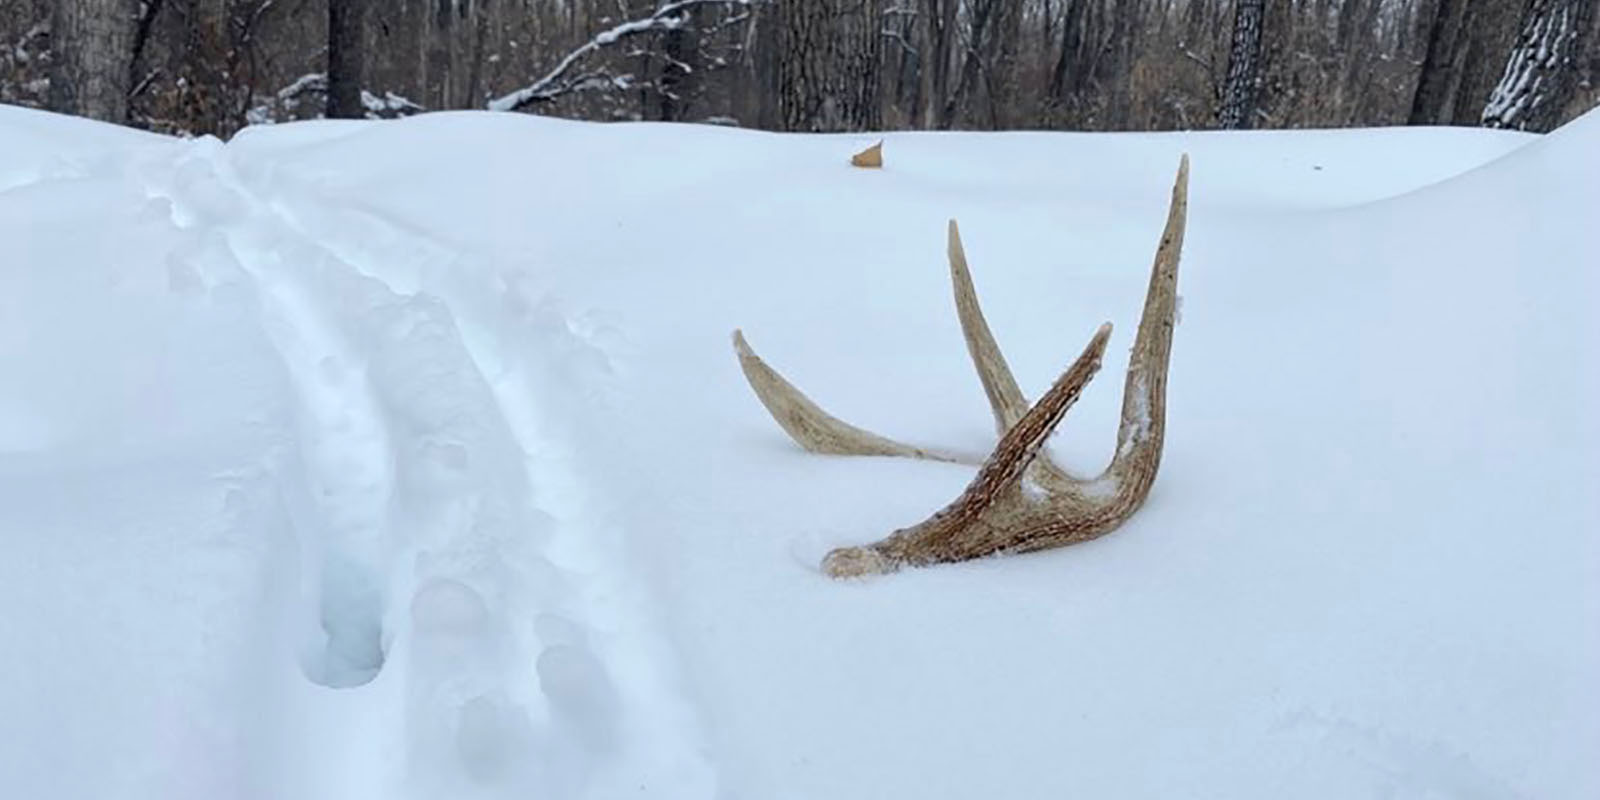 Antler in snow March 2023